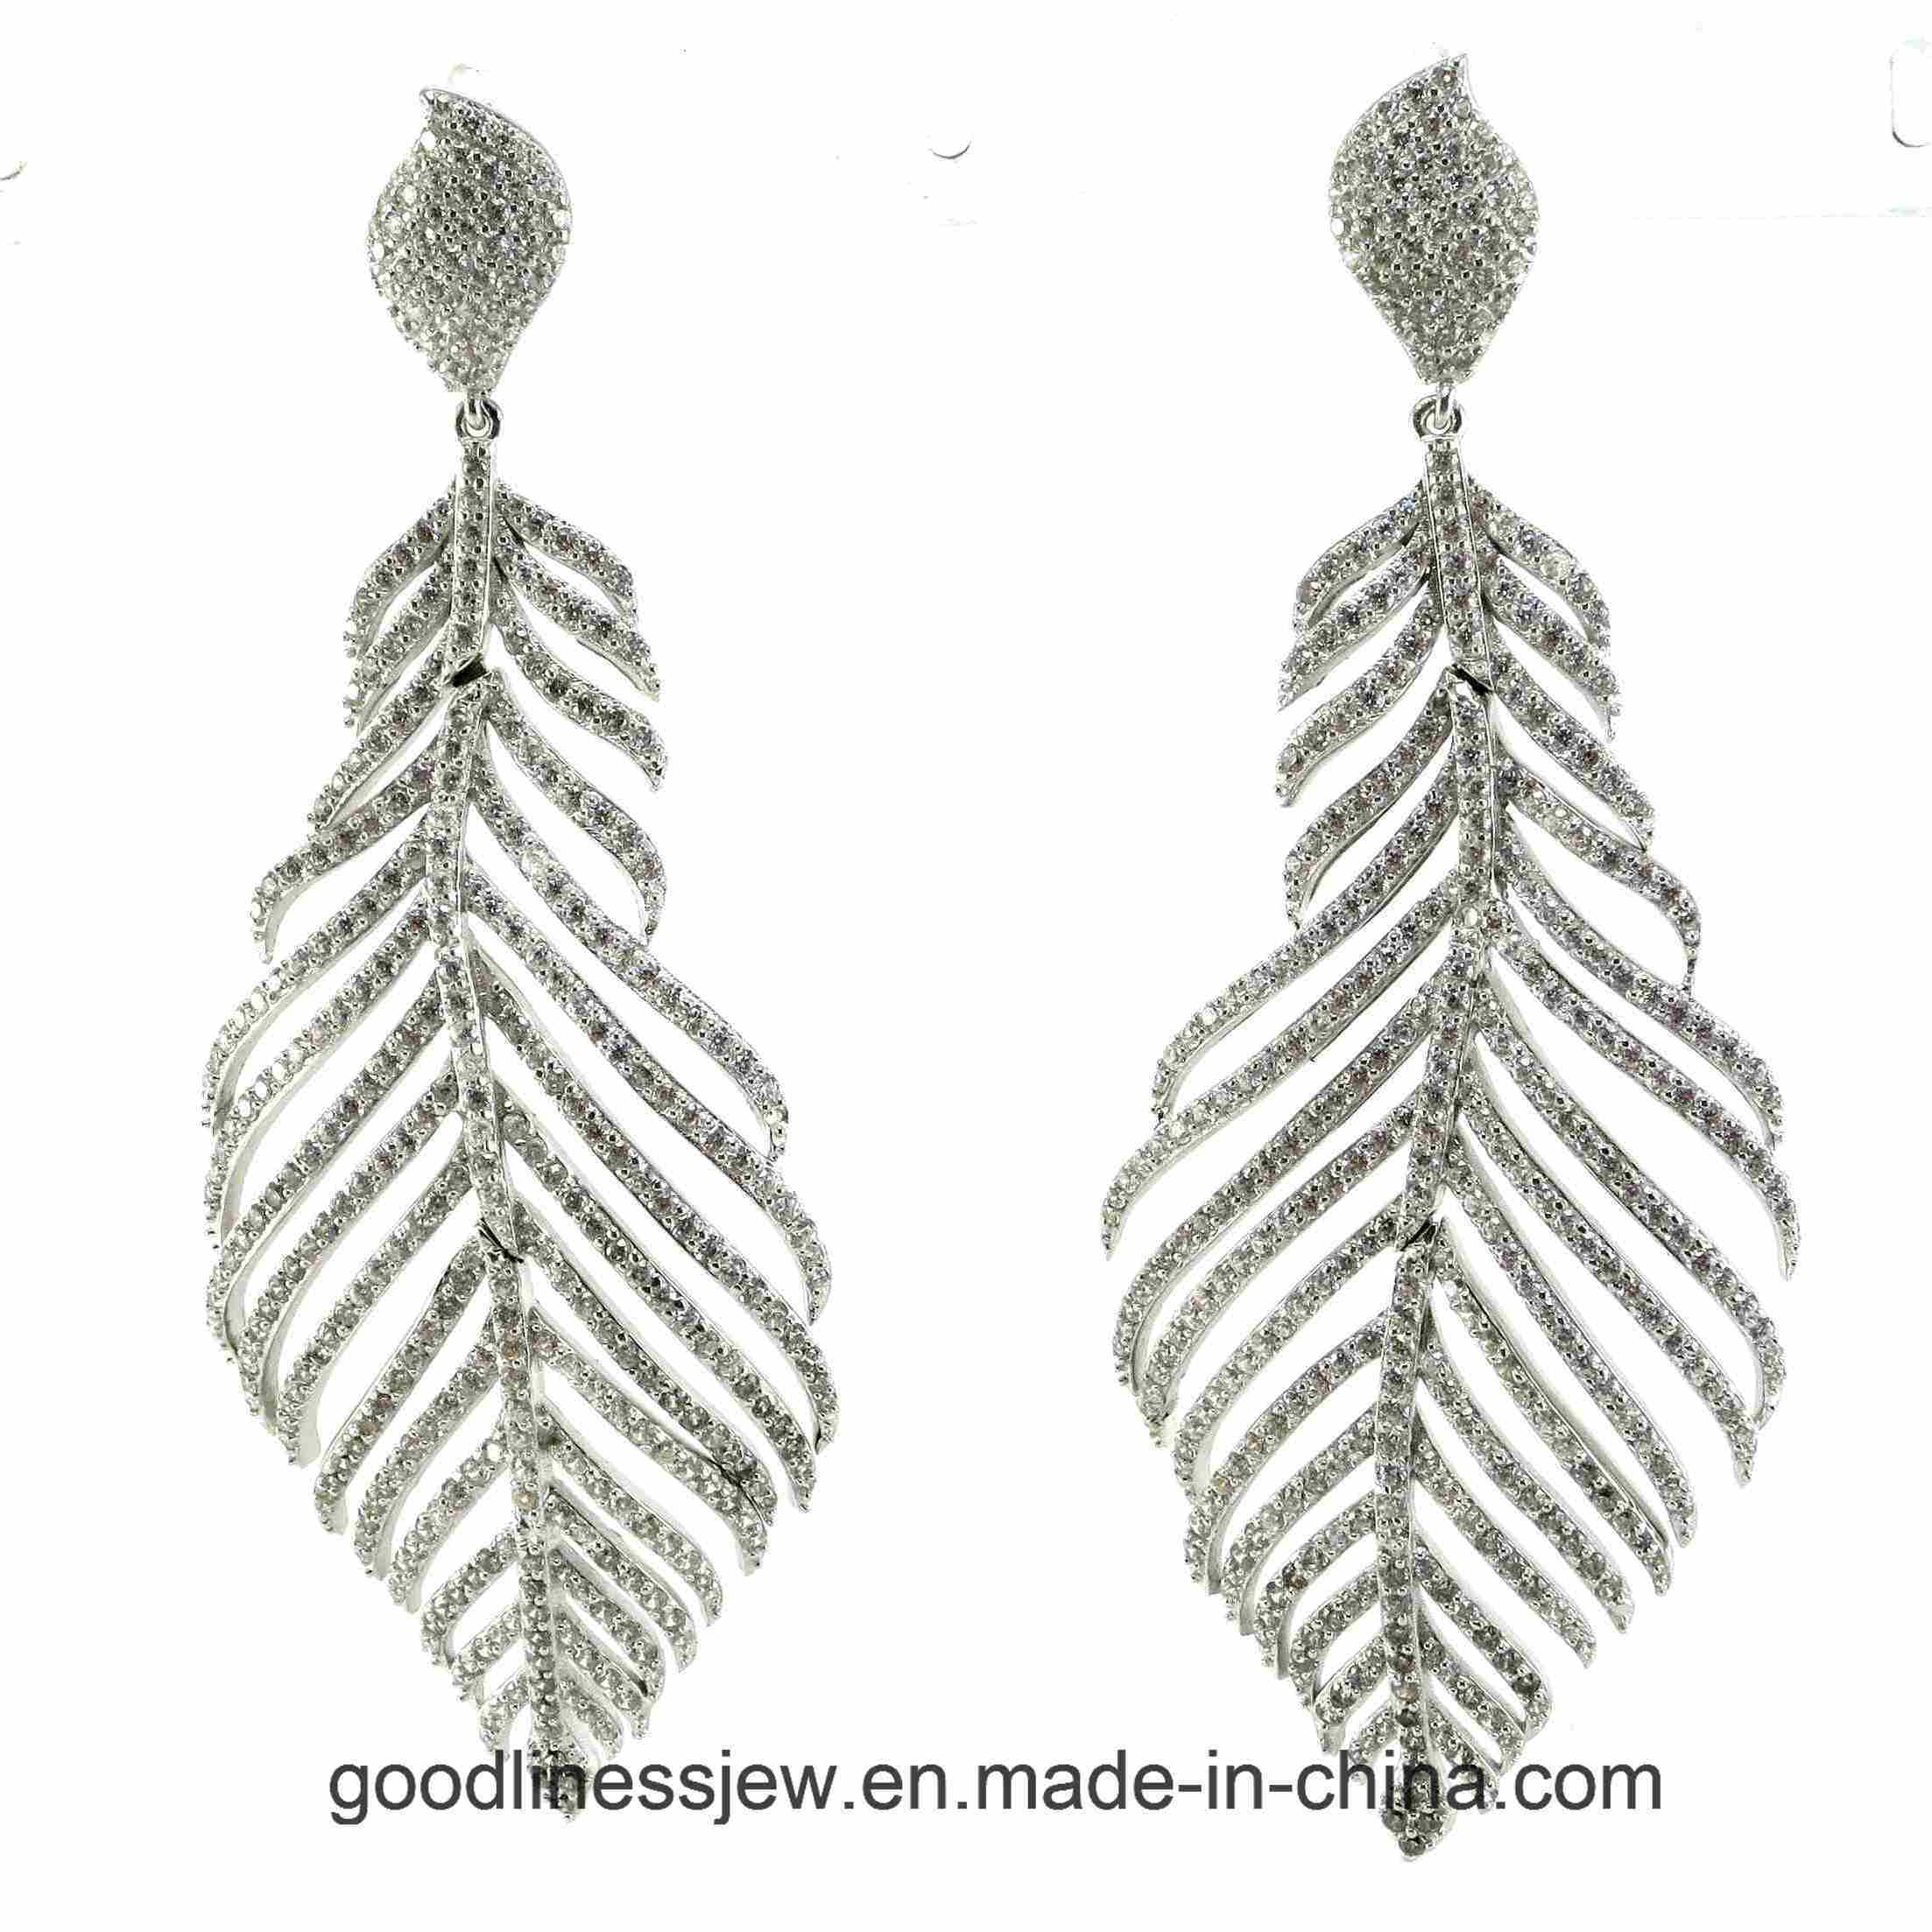 Hot Sale and Fashion Beautiful European Sterling Silver Jewelry Earring (E6132)